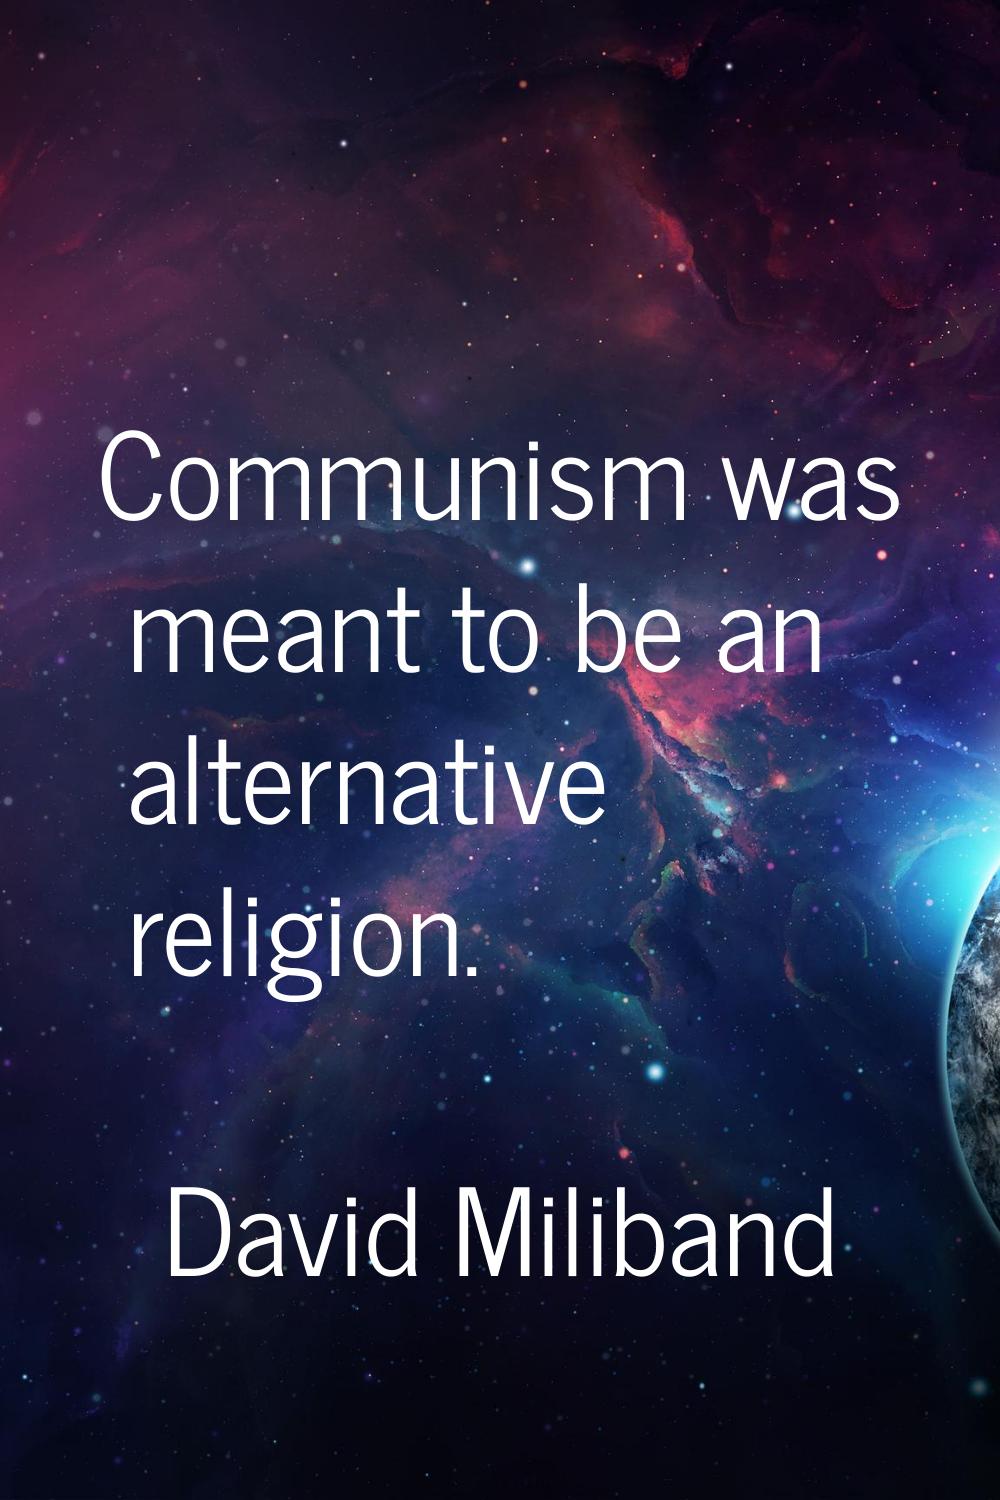 Communism was meant to be an alternative religion.